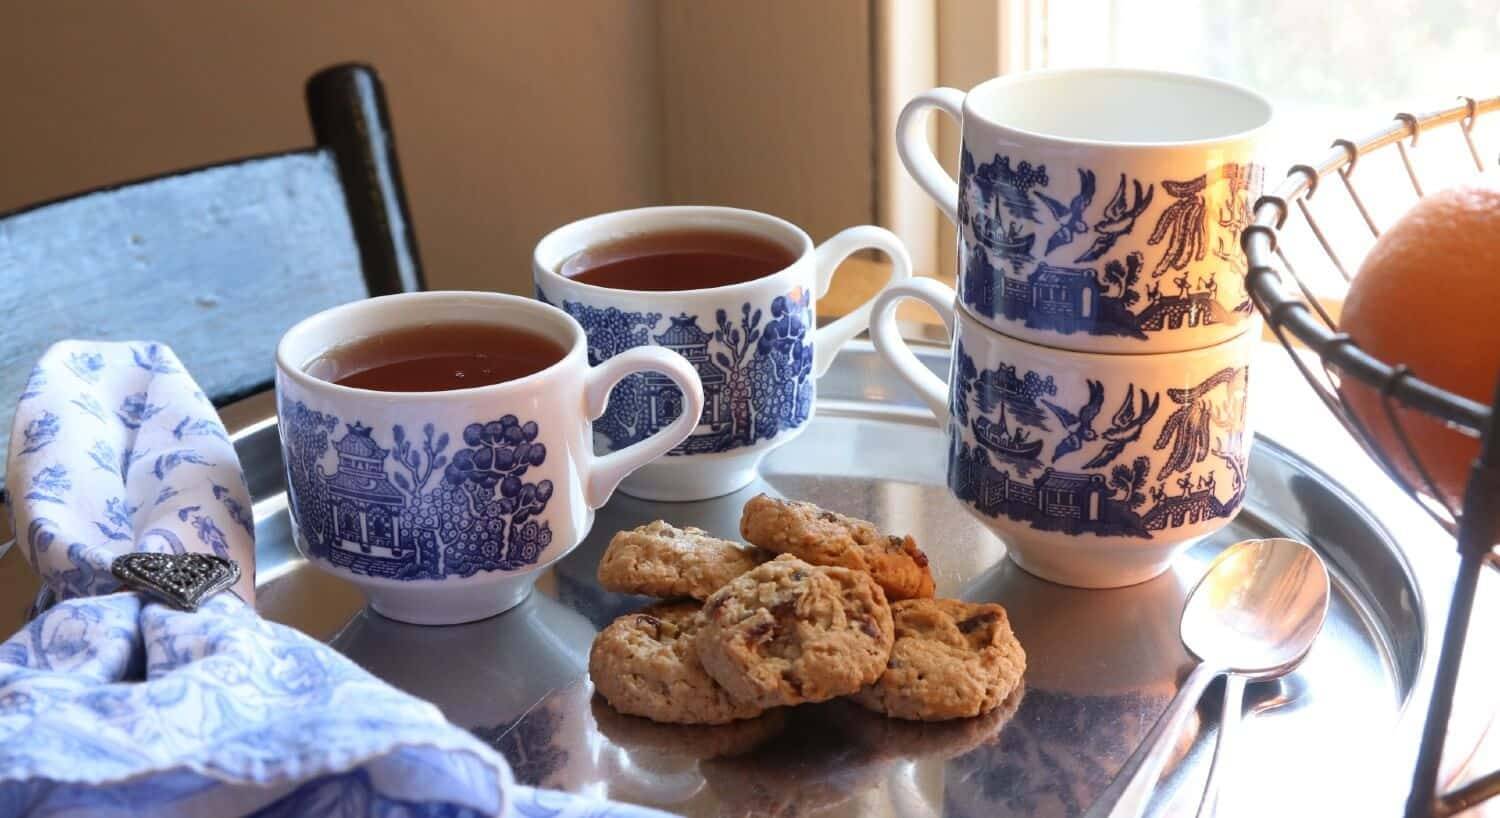 Silver tray with four blue and white mugs, two filled with tea and five cookies